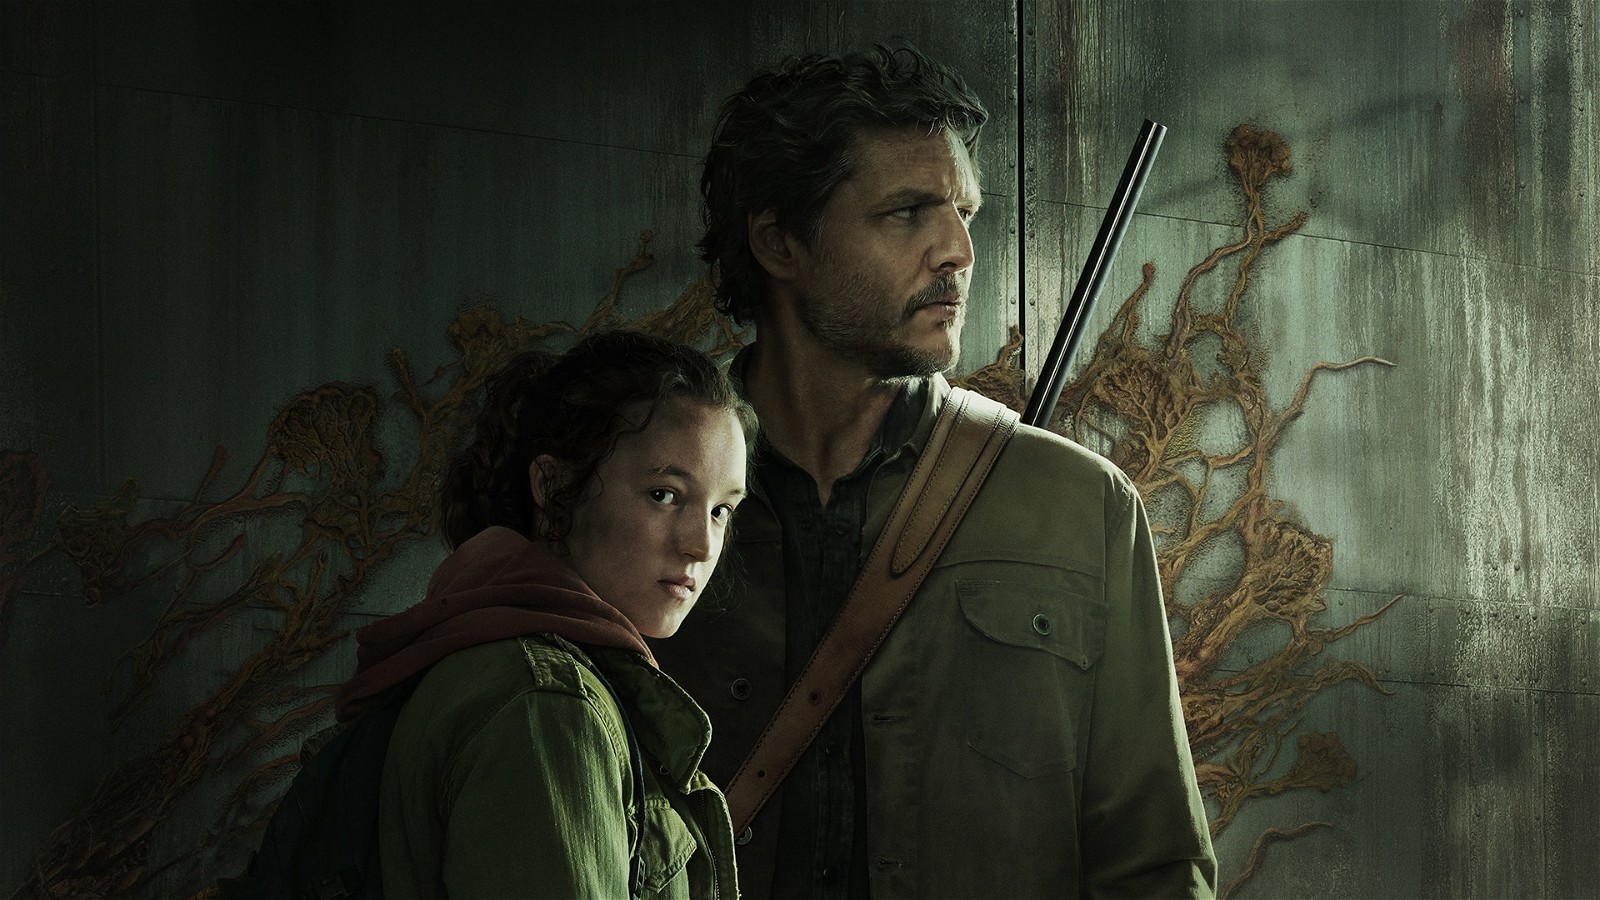 Pedro Pascal and Bella Ramsey in HBO's The Last of Us.